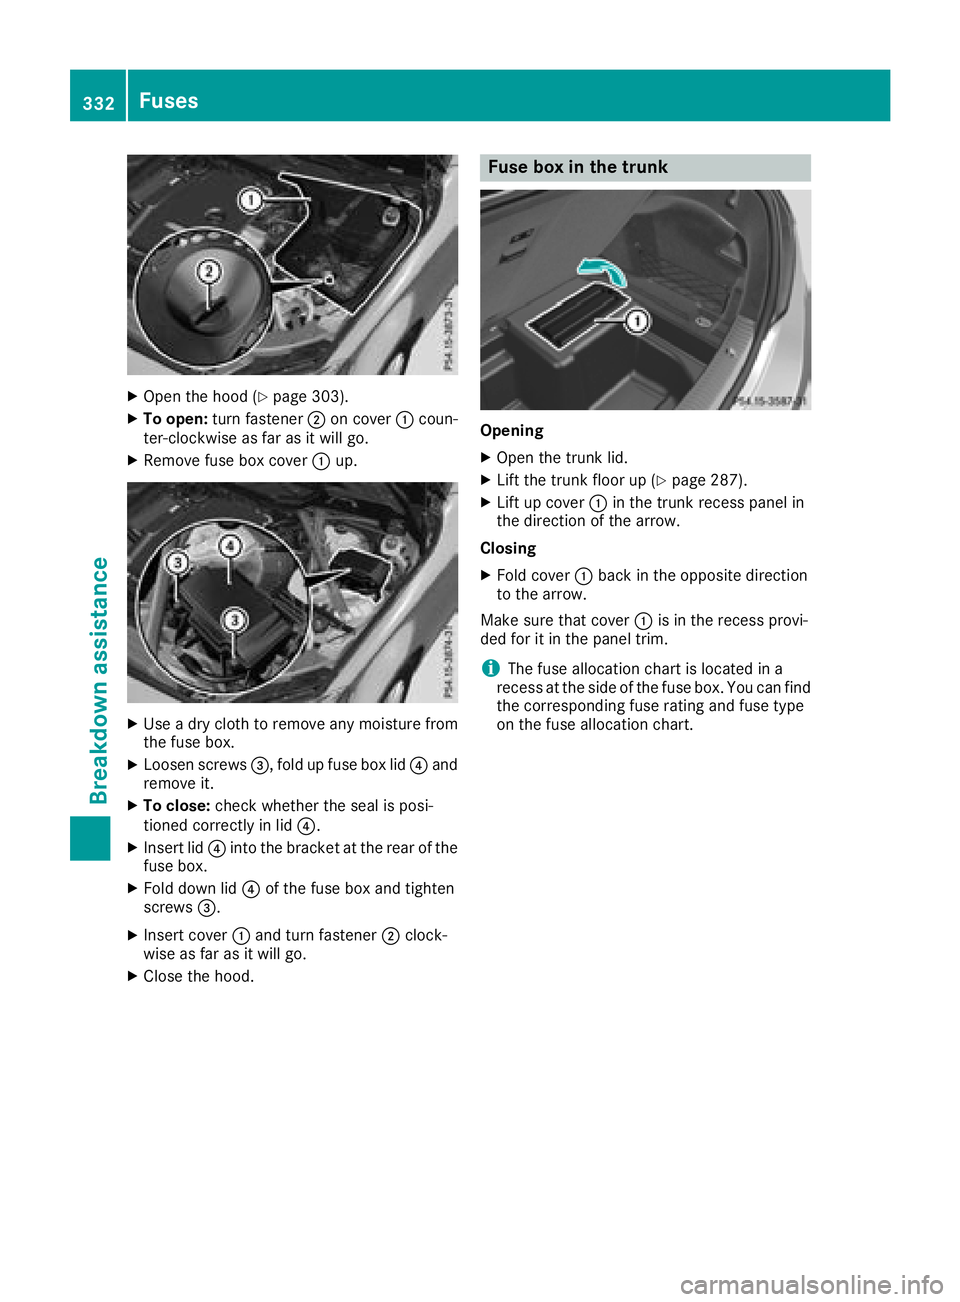 MERCEDES-BENZ C-CLASS SEDAN 2018  Owners Manual XOpen the hood (Ypage 303).
XTo open:turn fastener ;on cover :coun-
ter-clockwise as far as it will go.
XRemove fuse box cover :up.
XUse a dry cloth to remove any moisture from
the fuse box.
XLoosen s